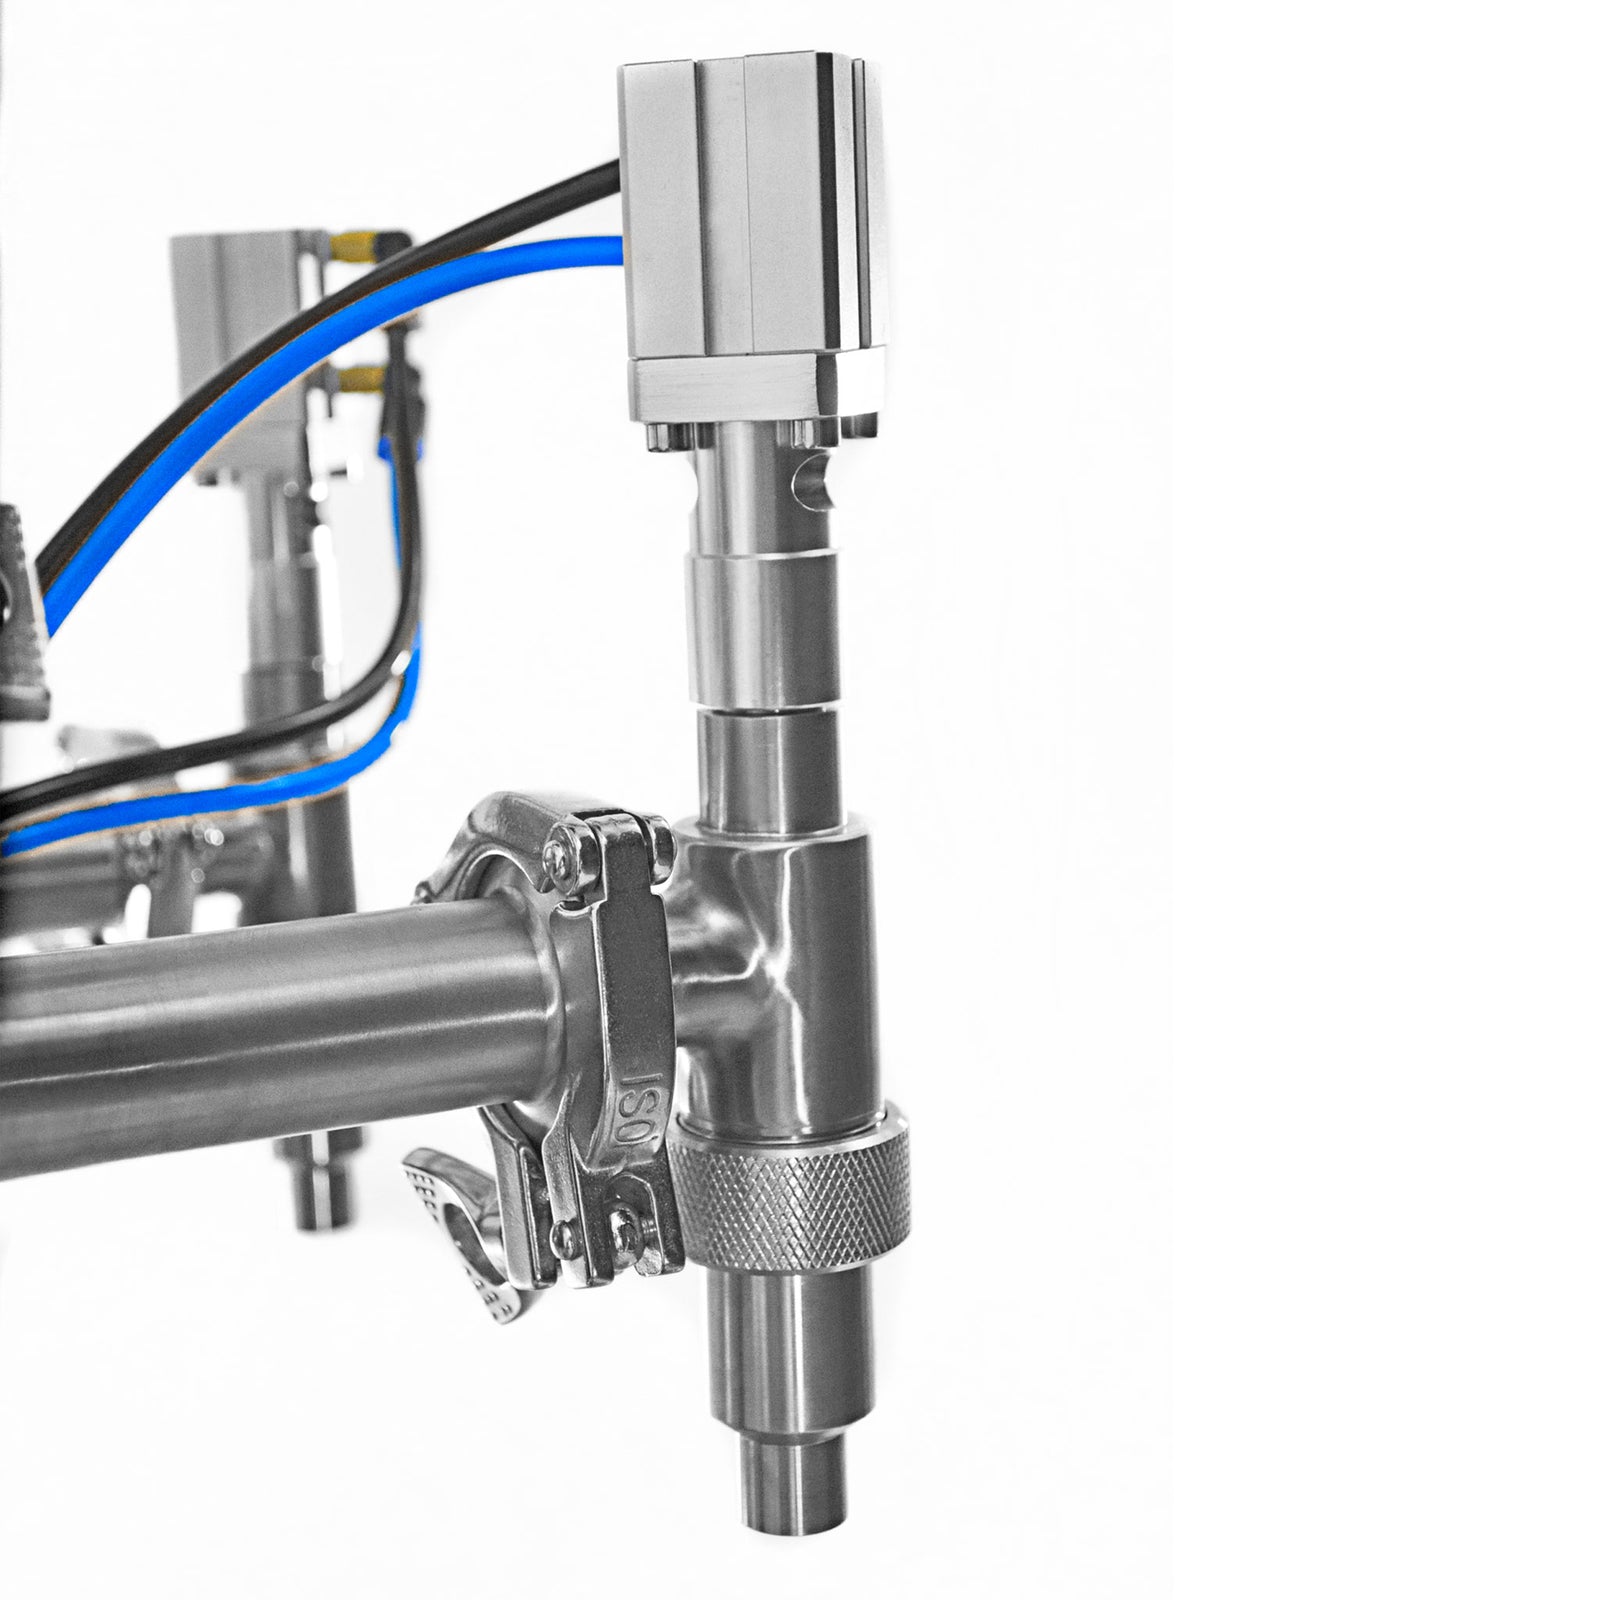 Closeup of the two stainless steel non-drip dispensing nozzles and pressured air hoses of the JORES TECHNOLOGIES® high viscosity piston filler